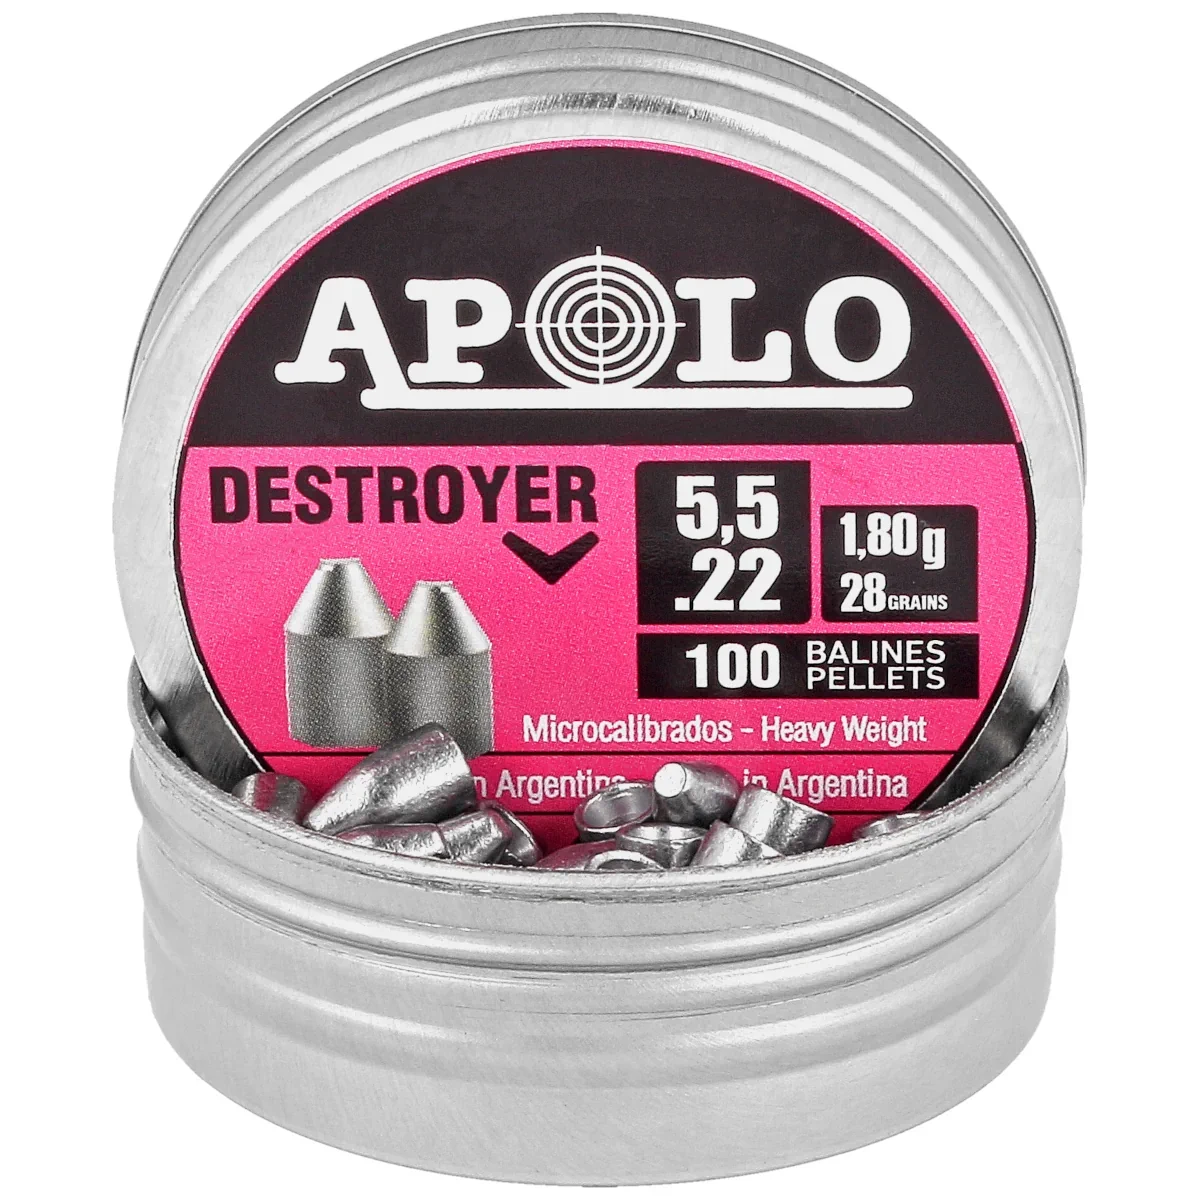 Balines APOLO Destroyer 5.5mm